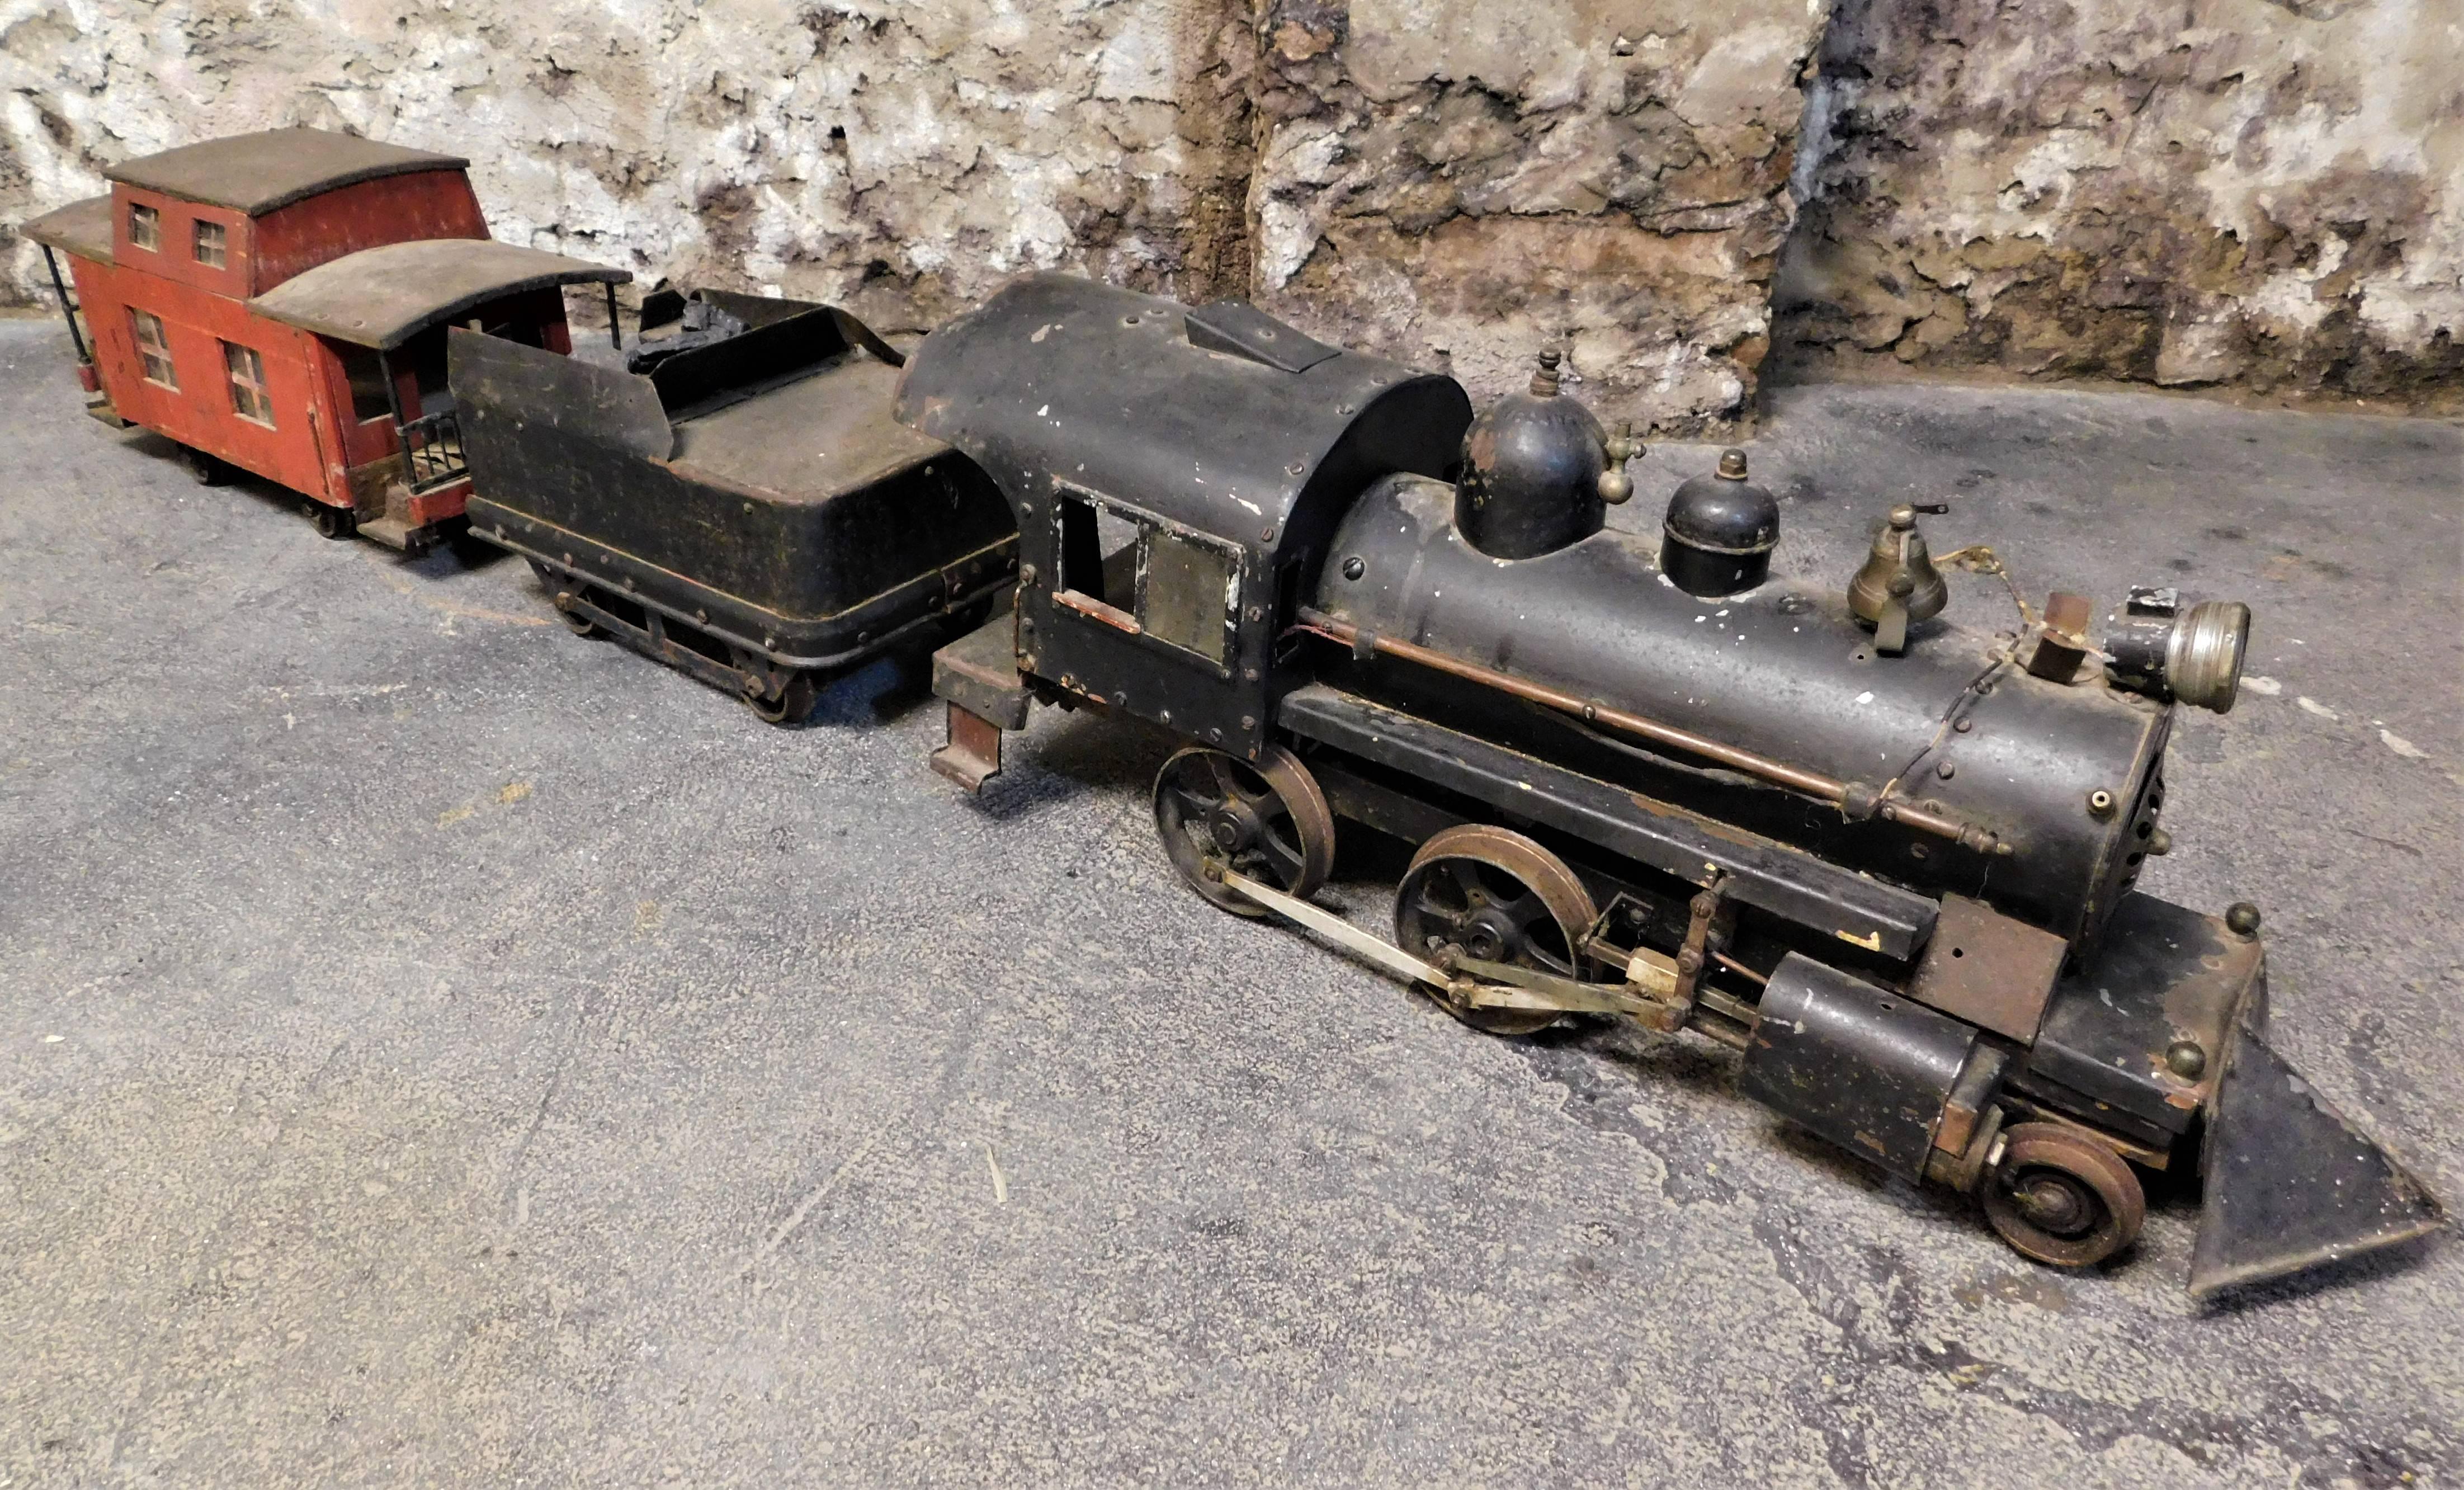 This large American Folk Art metal train with a locomotive engine which measures 30.5 inches long, coal car which measures 14 inches long and caboose 22 inches long.